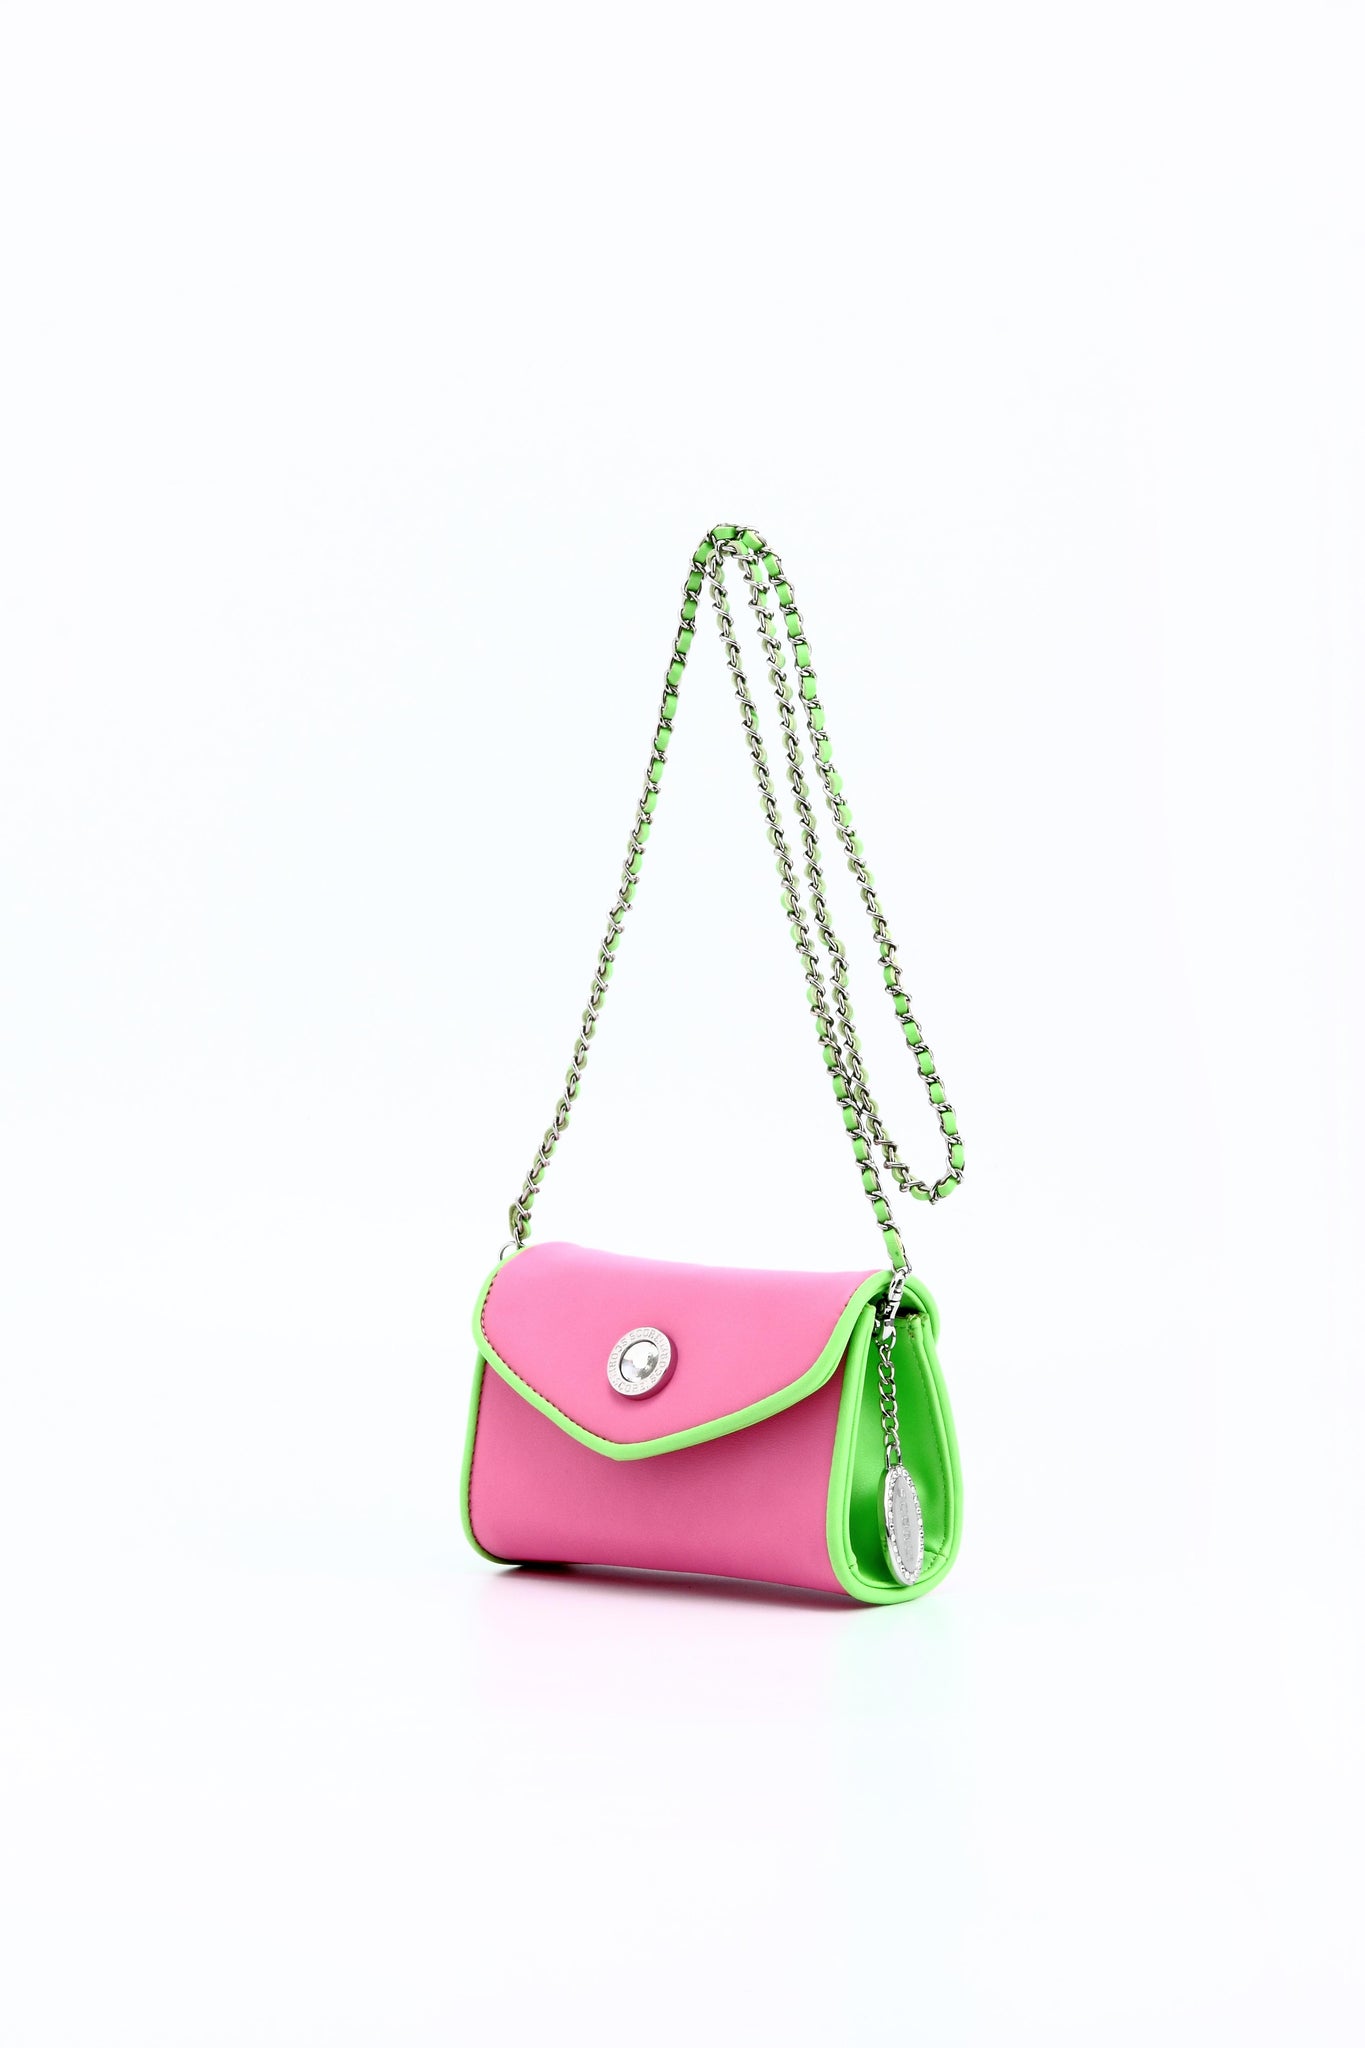 IN STOCK NOW Salmon Pink and Candy Apple Green Vintage Style Beaded Handbag  With Kiss Close Handle - Etsy